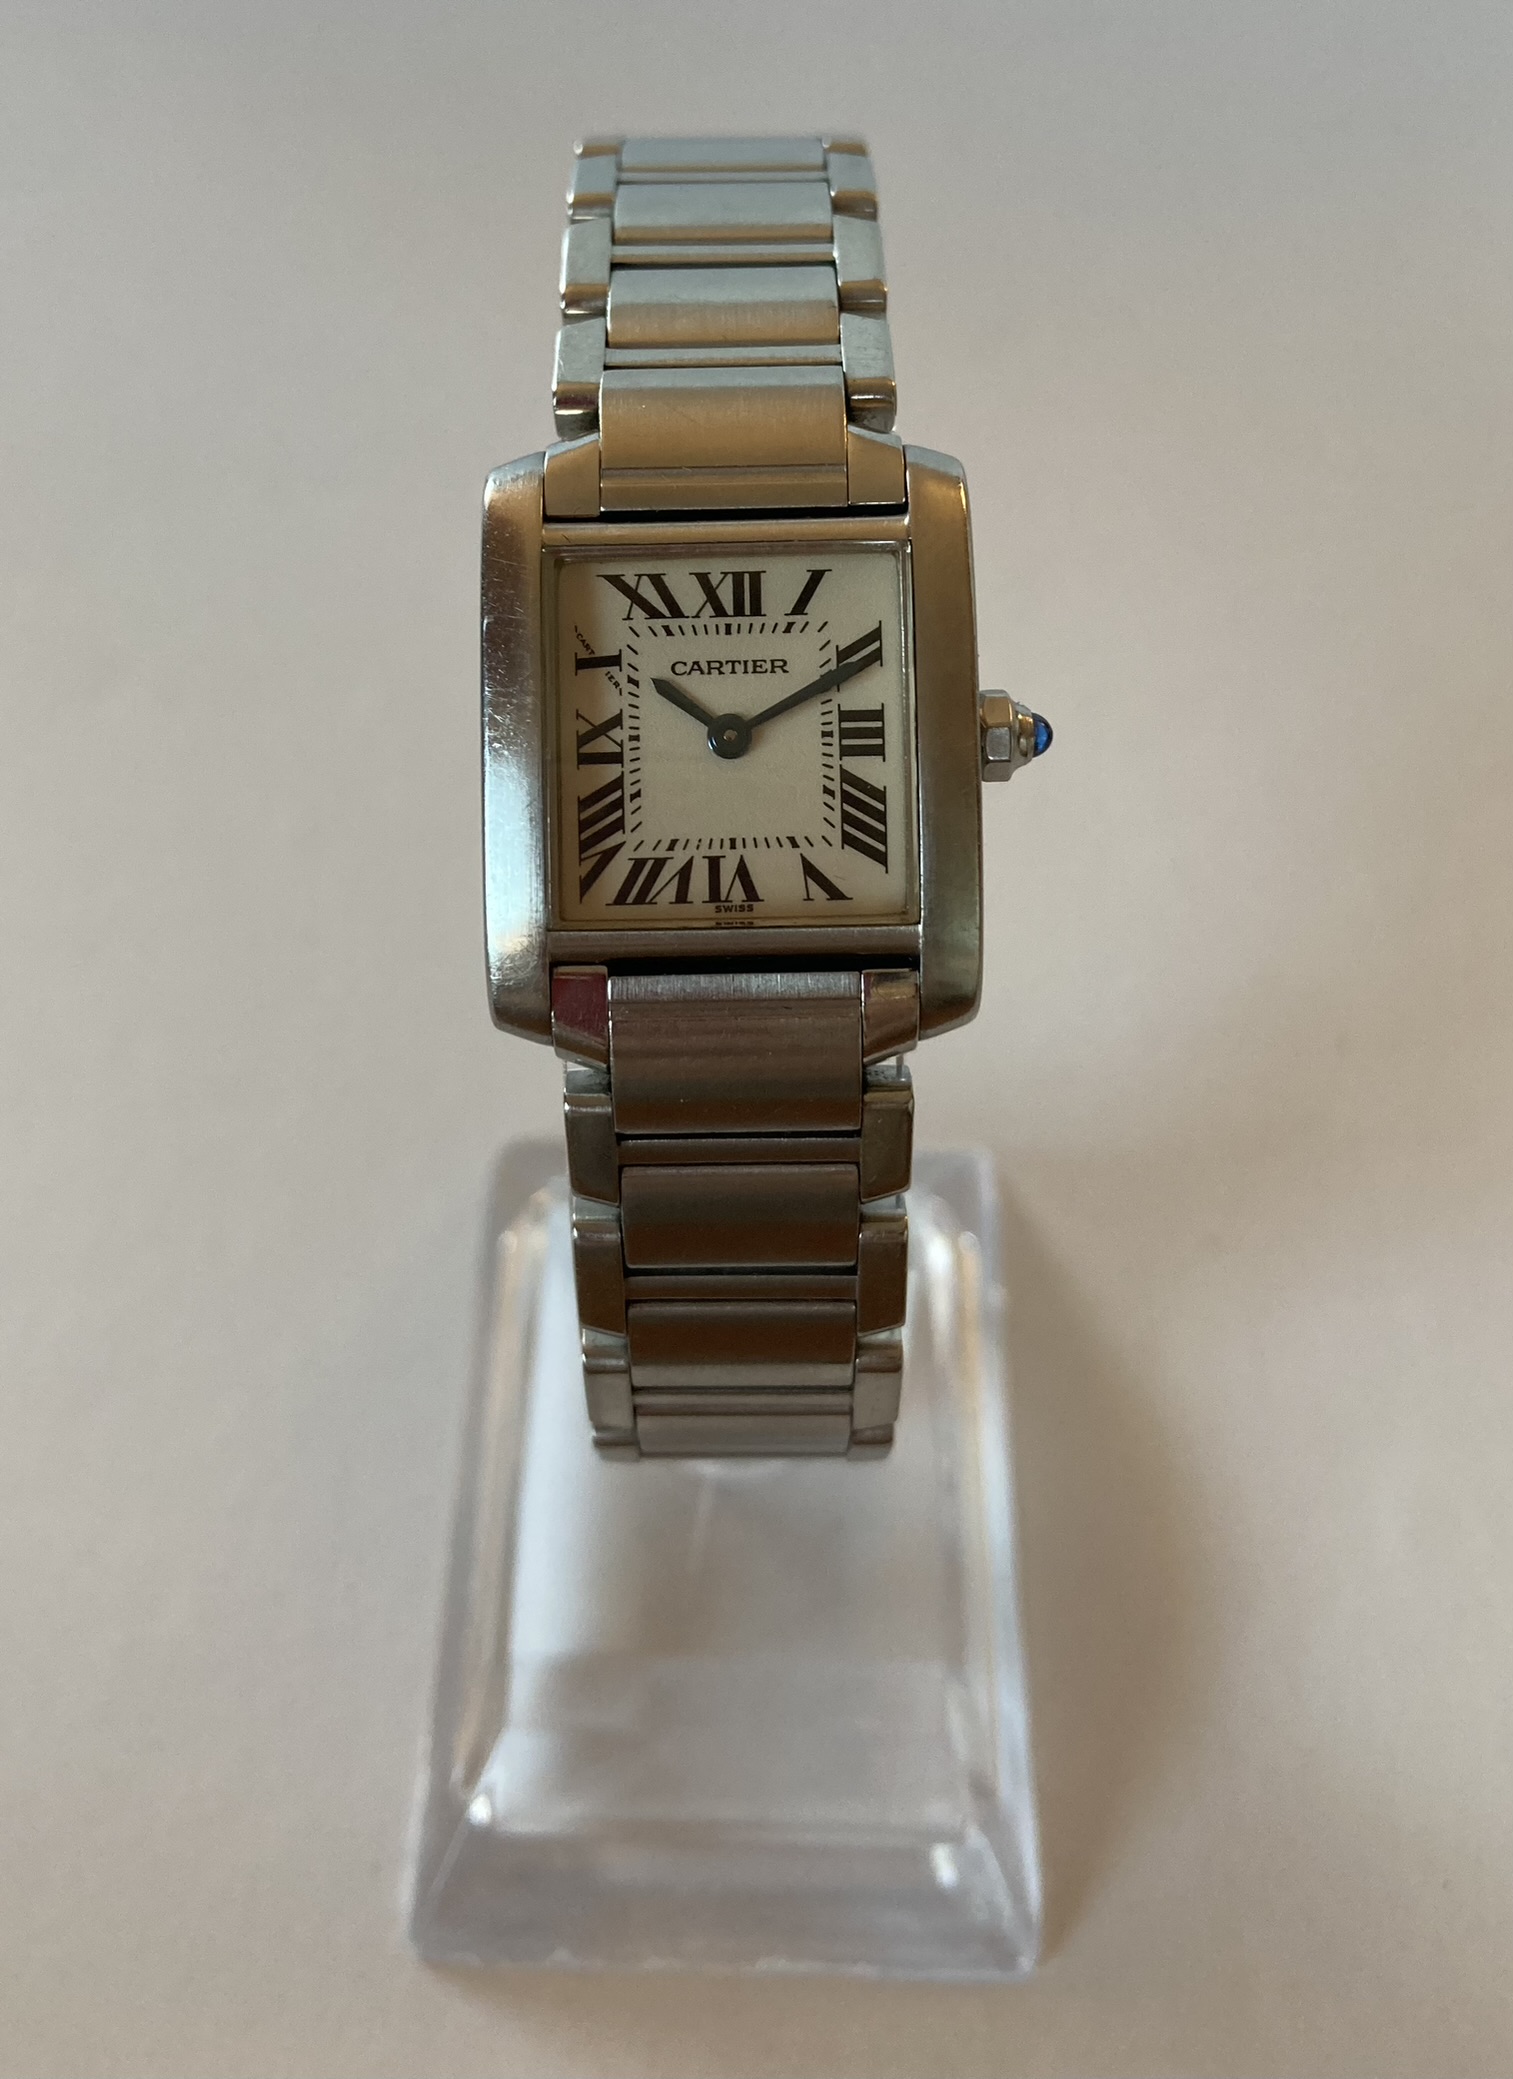 Sell cartier tank watch in Sant Quirze del Valles